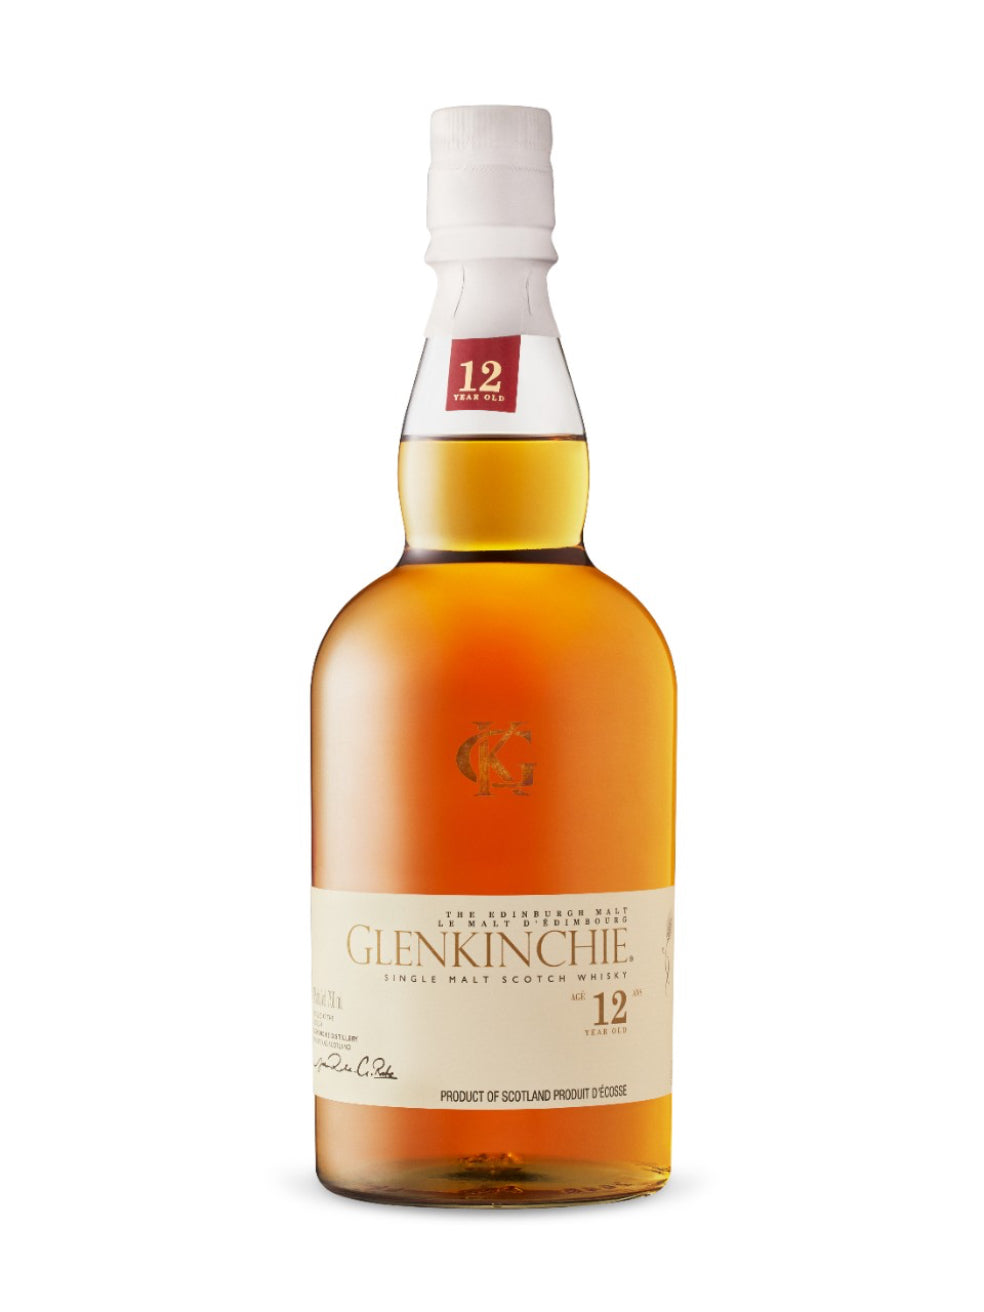 The Glenkinchie 12-Year old Lowland Single Malt Scotch Whisky is complex and smooth with great depth of flavours.